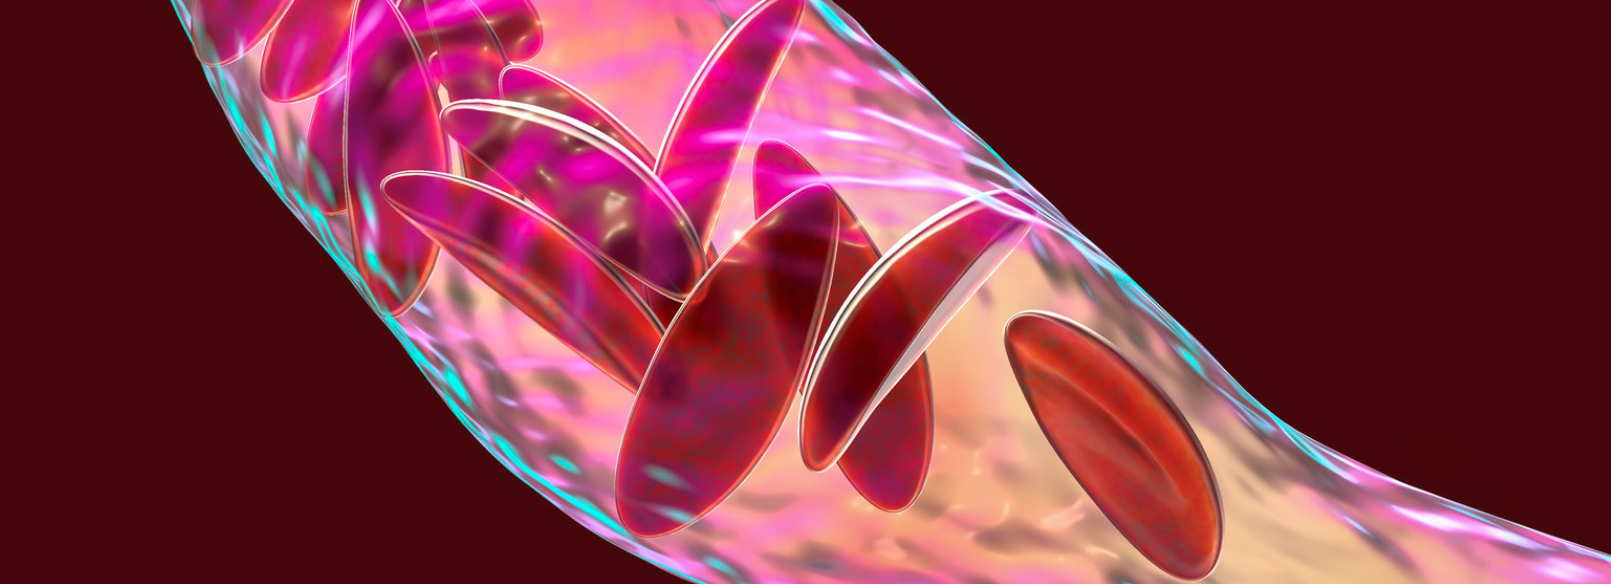 computer generated image of blood cells with sickle cell disease in veins